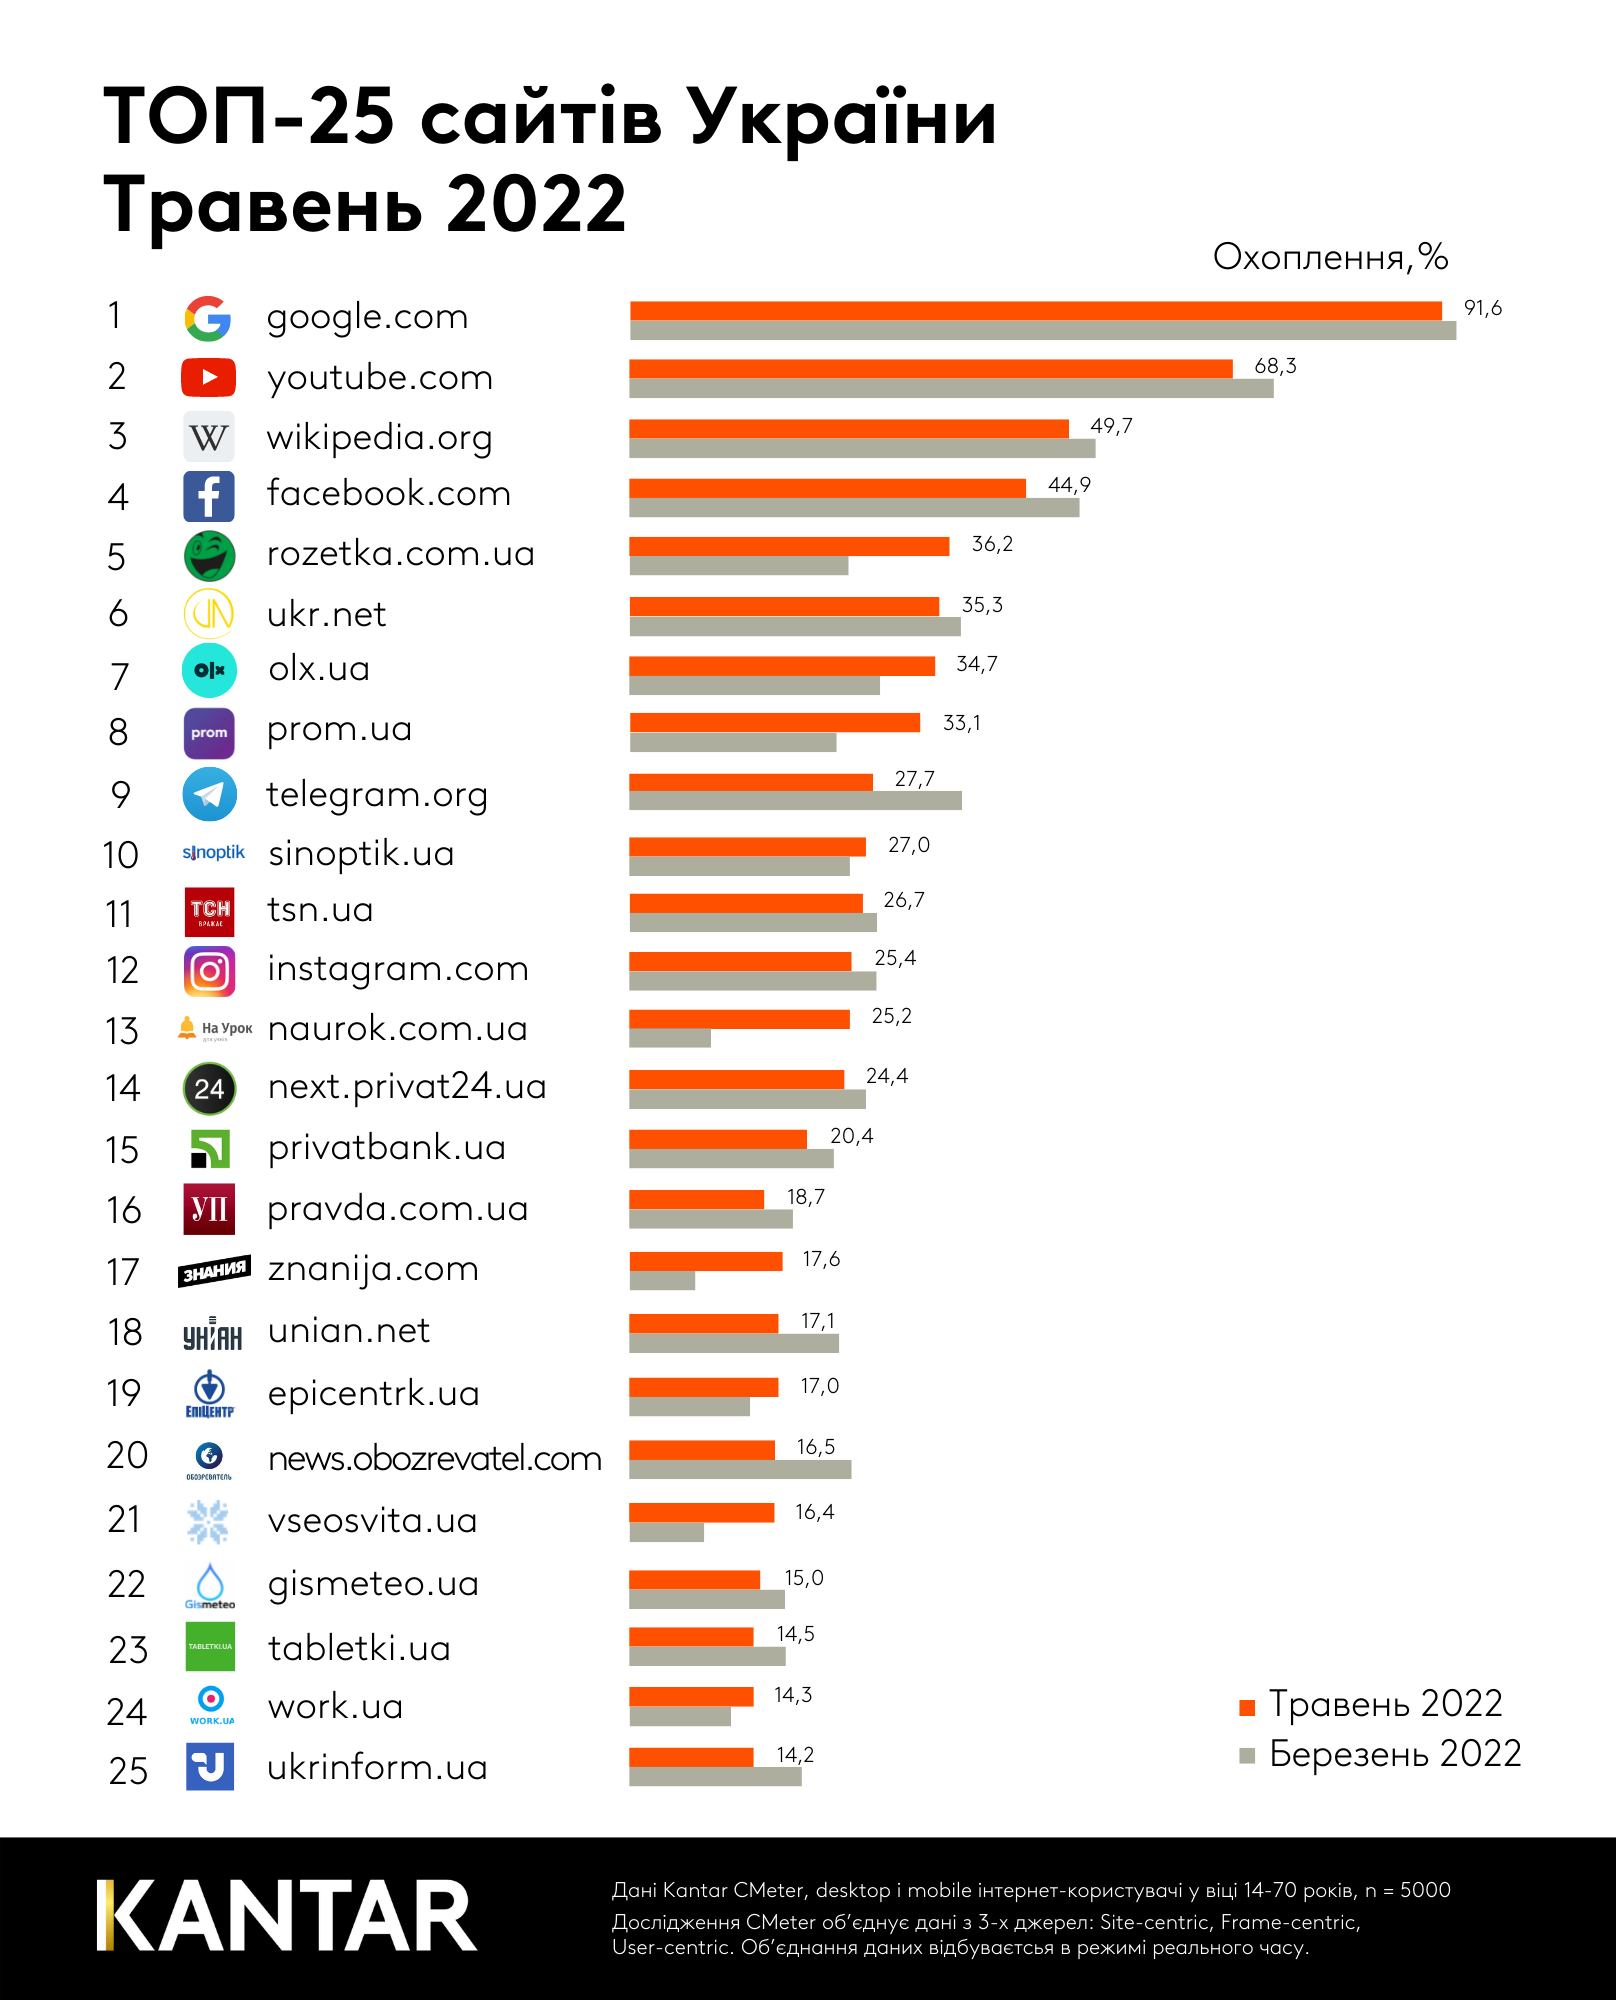 Rating of the most popular websites in Ukraine for May 2022 [инфографика]